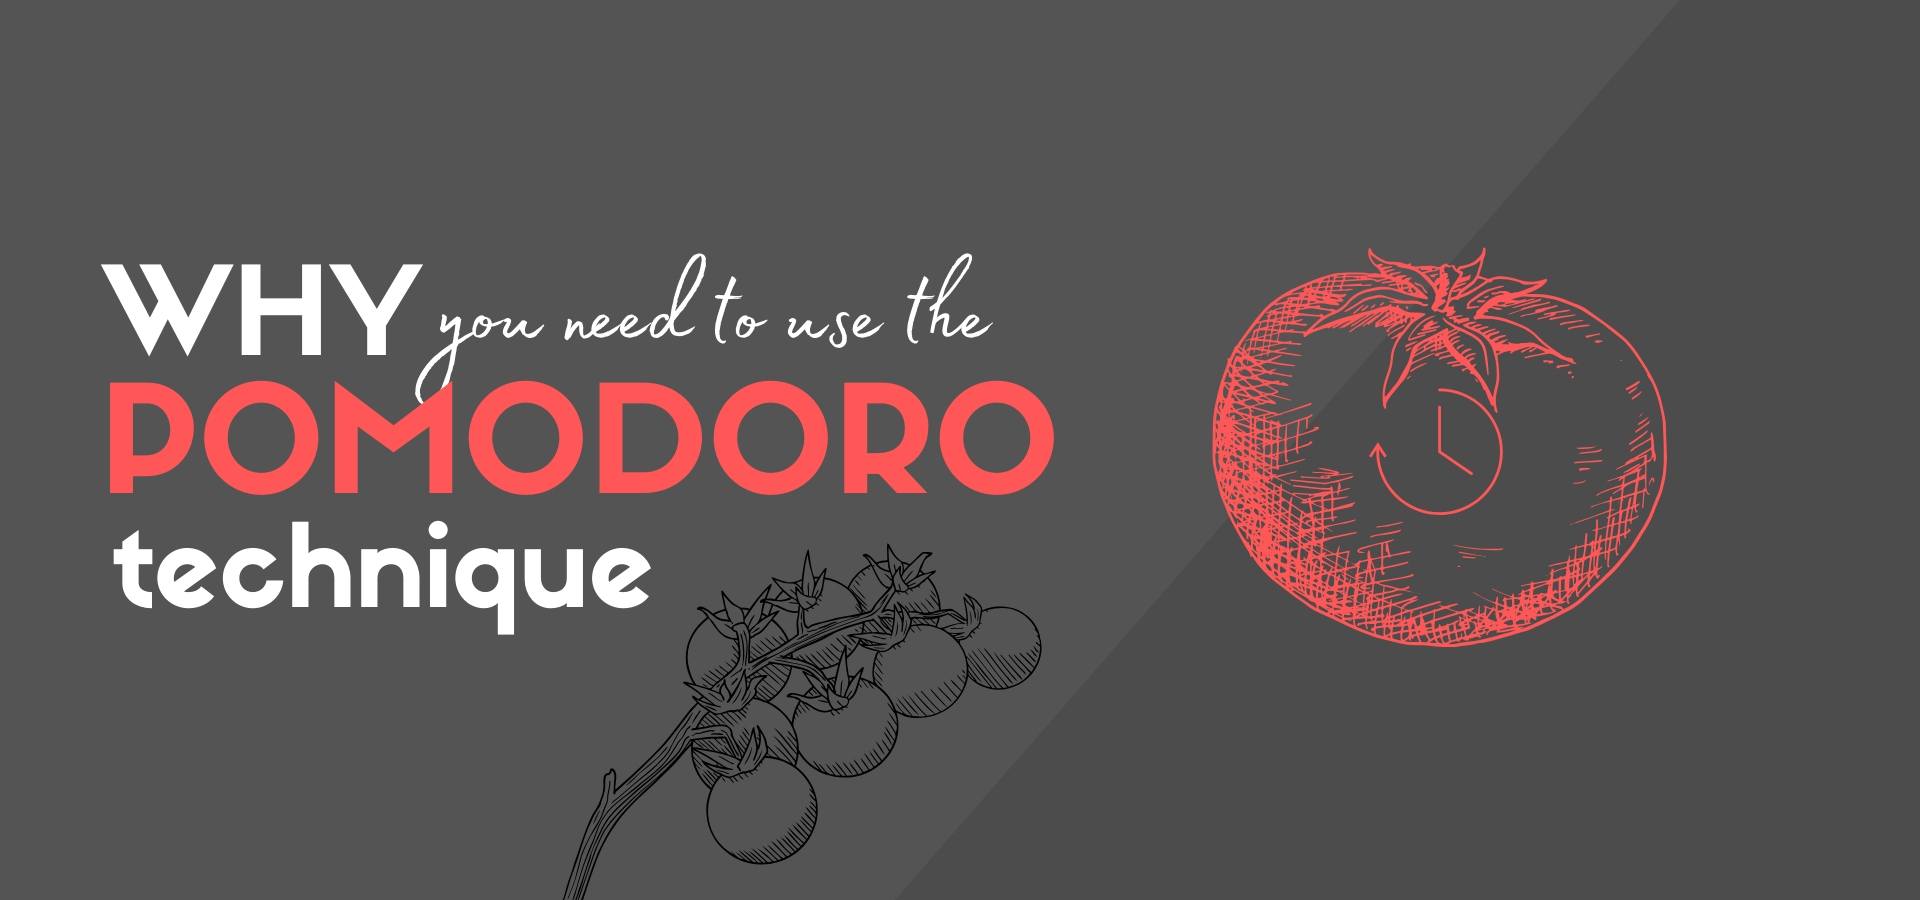 Why use the pomodoro technique_Featured image